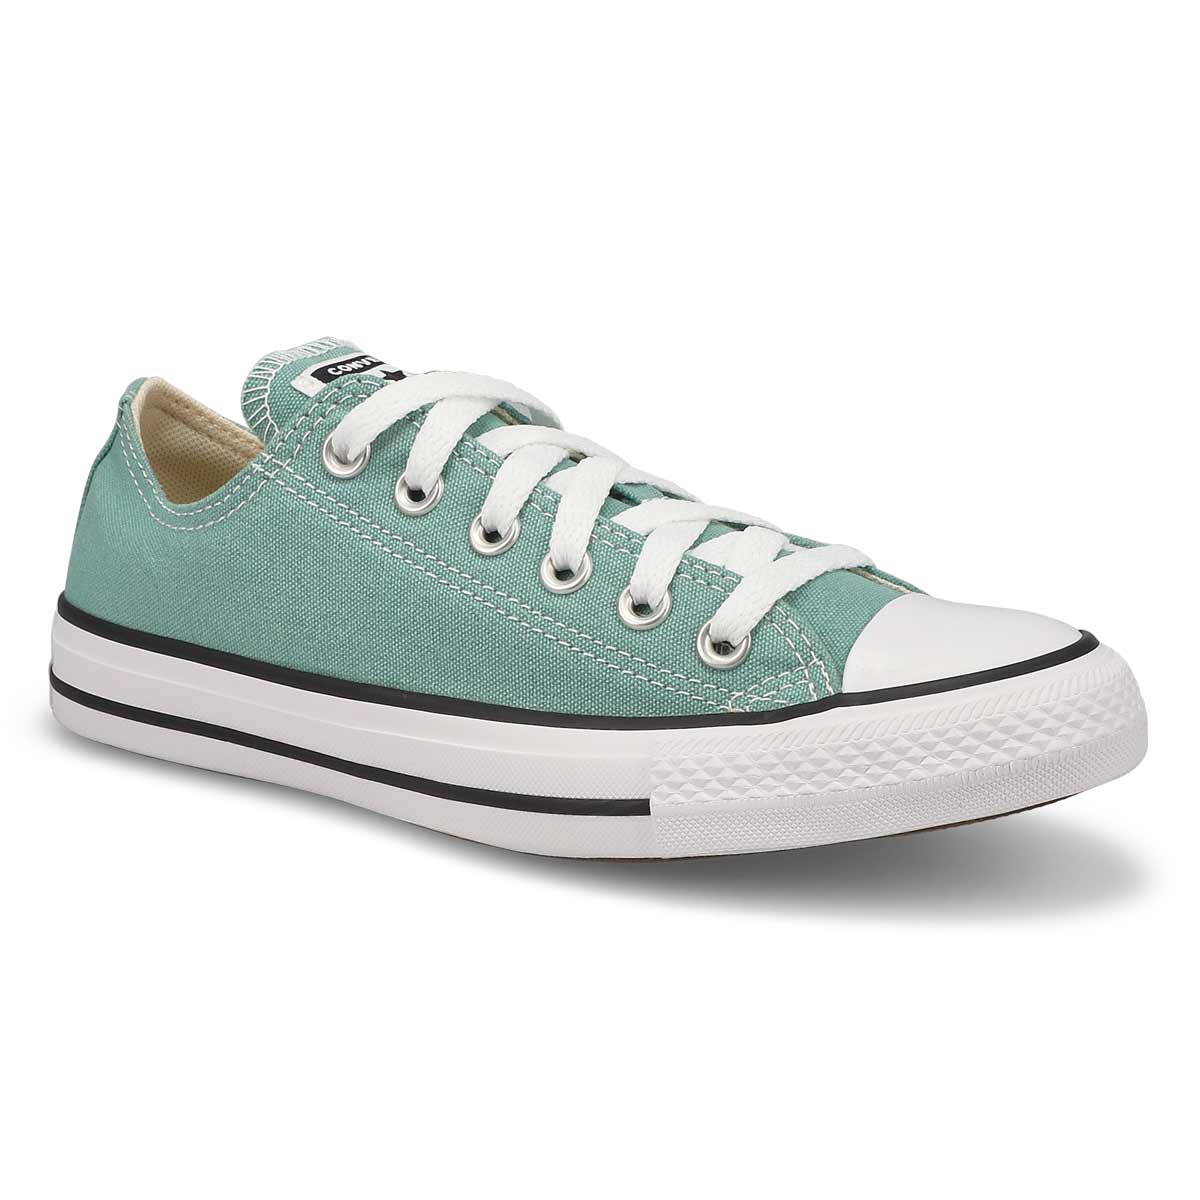 Womens Chuck Taylor All Star Sneaker - Herby